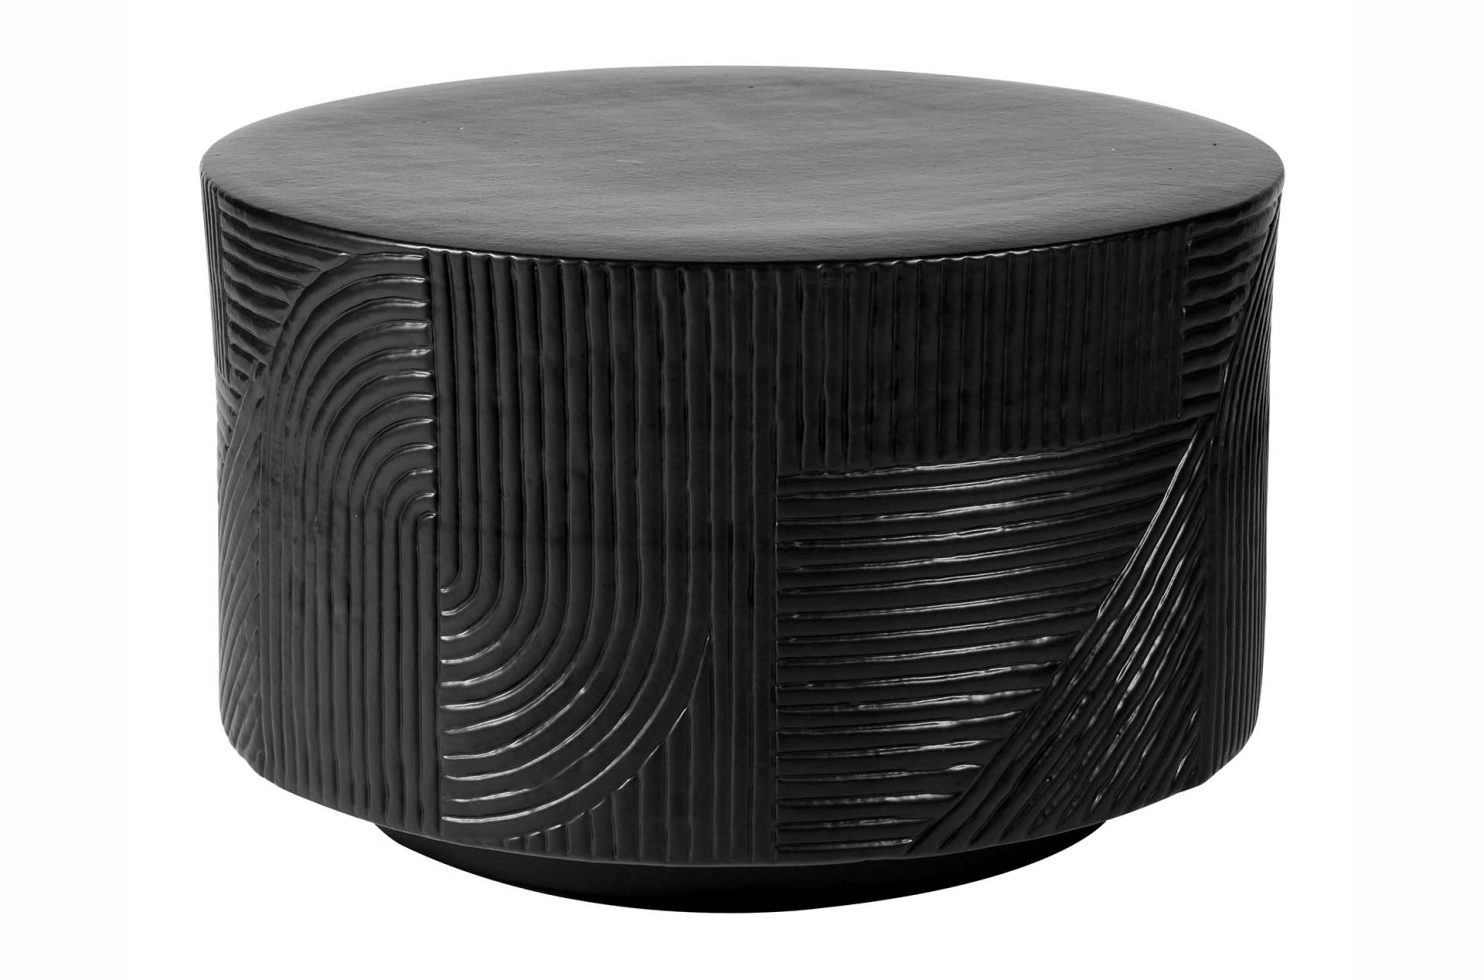 prov cer serenity textured round table 24in C30891432 coal 1 main web